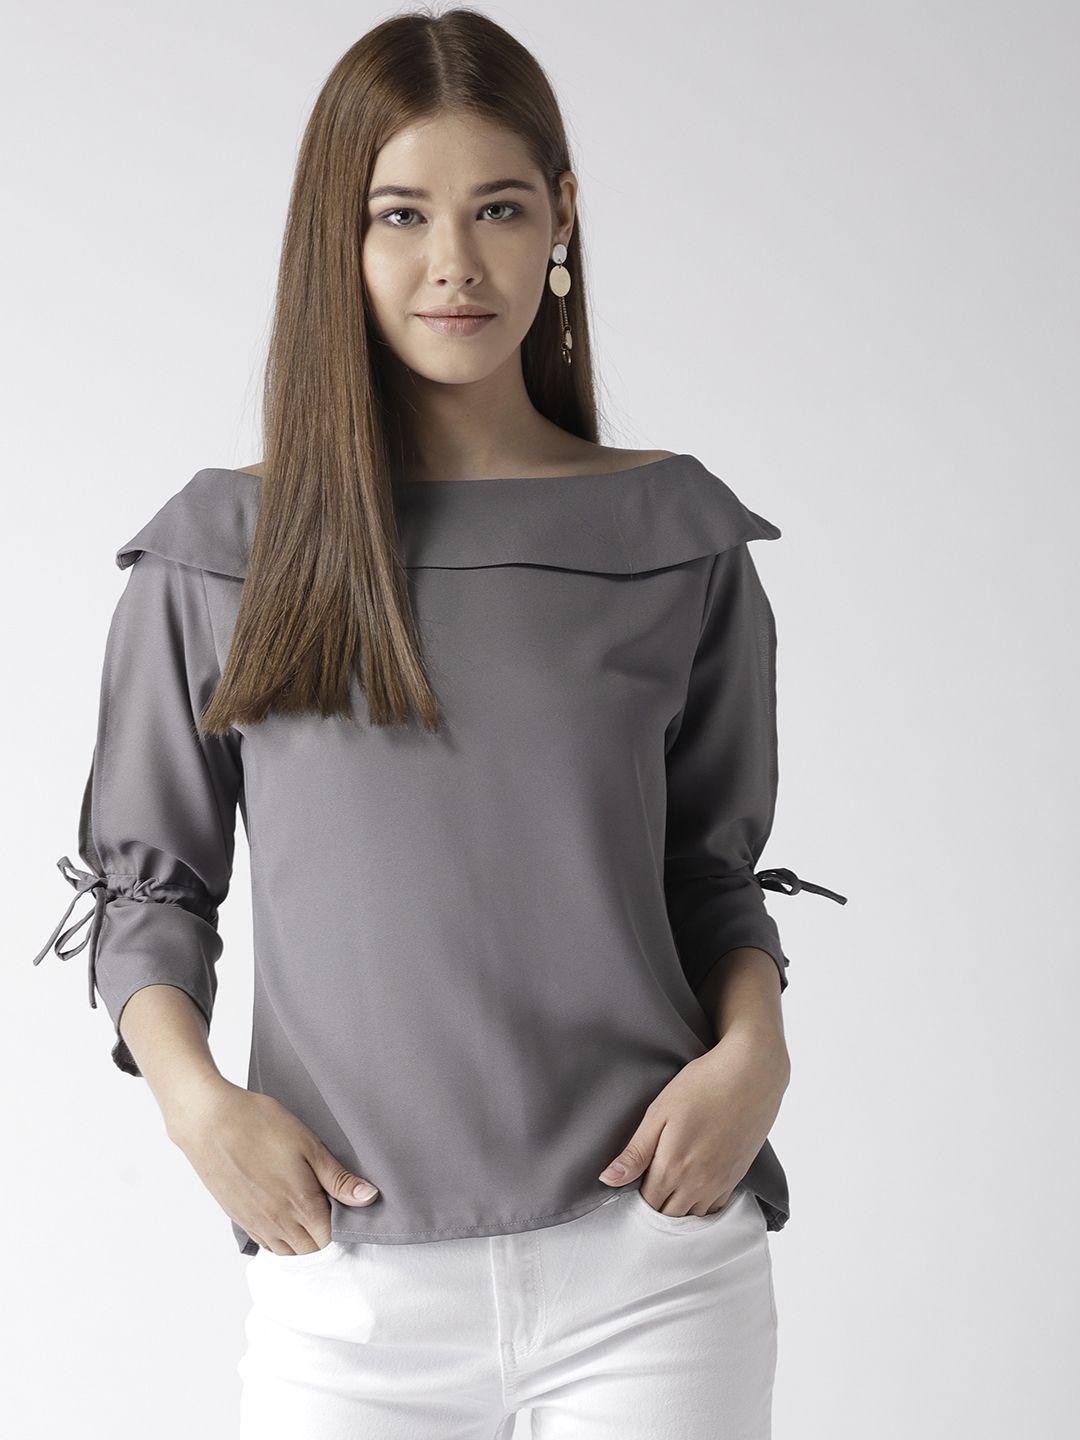 style-quotient-by-noi-women-grey-solid-top